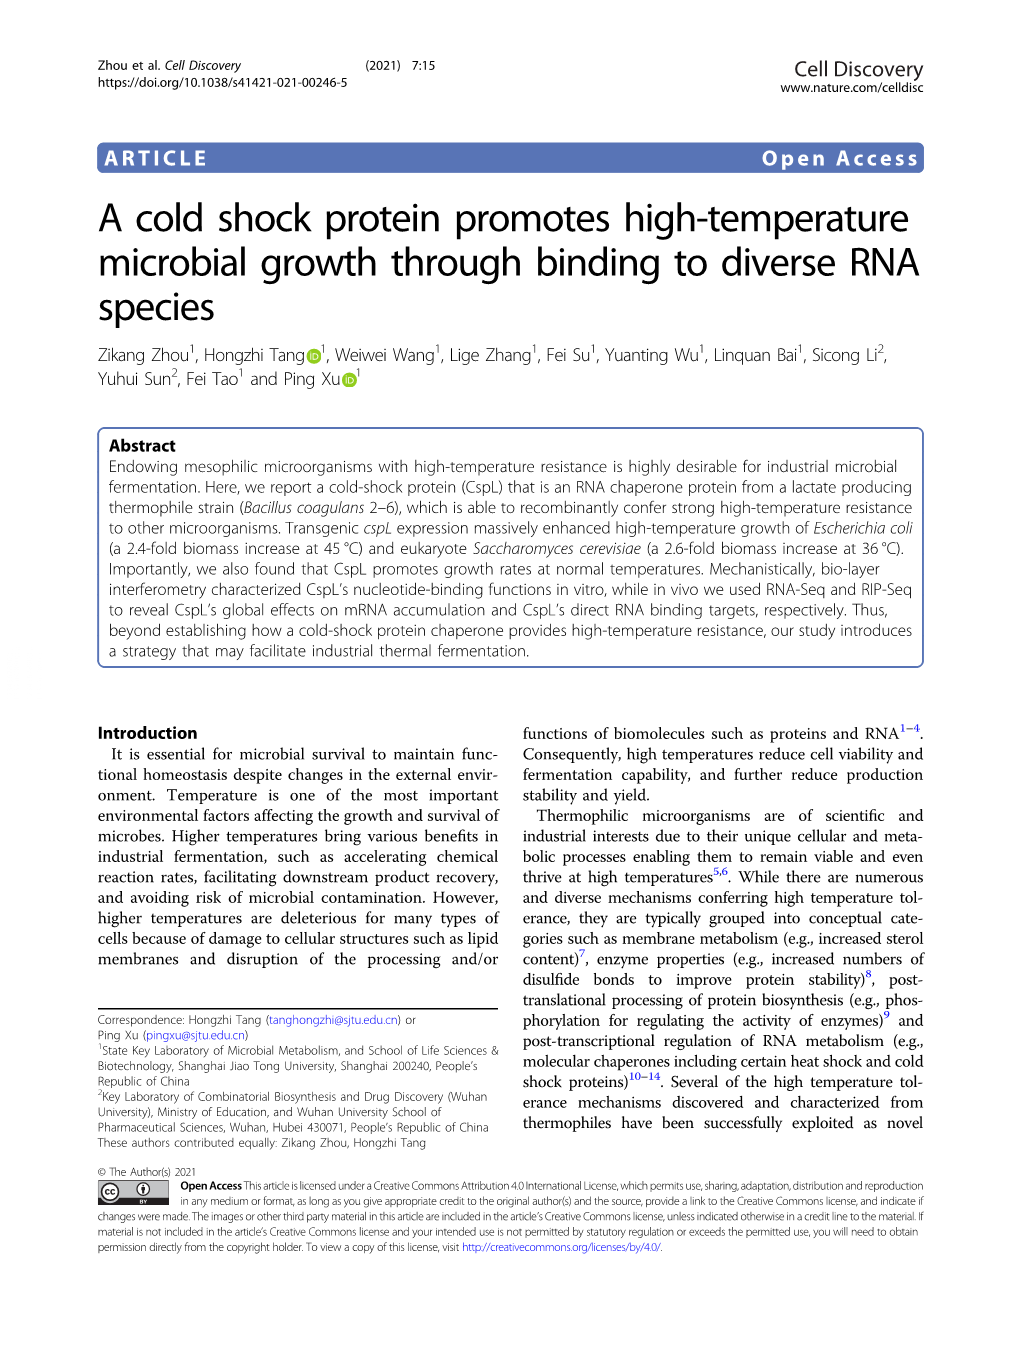 A Cold Shock Protein Promotes High-Temperature Microbial Growth